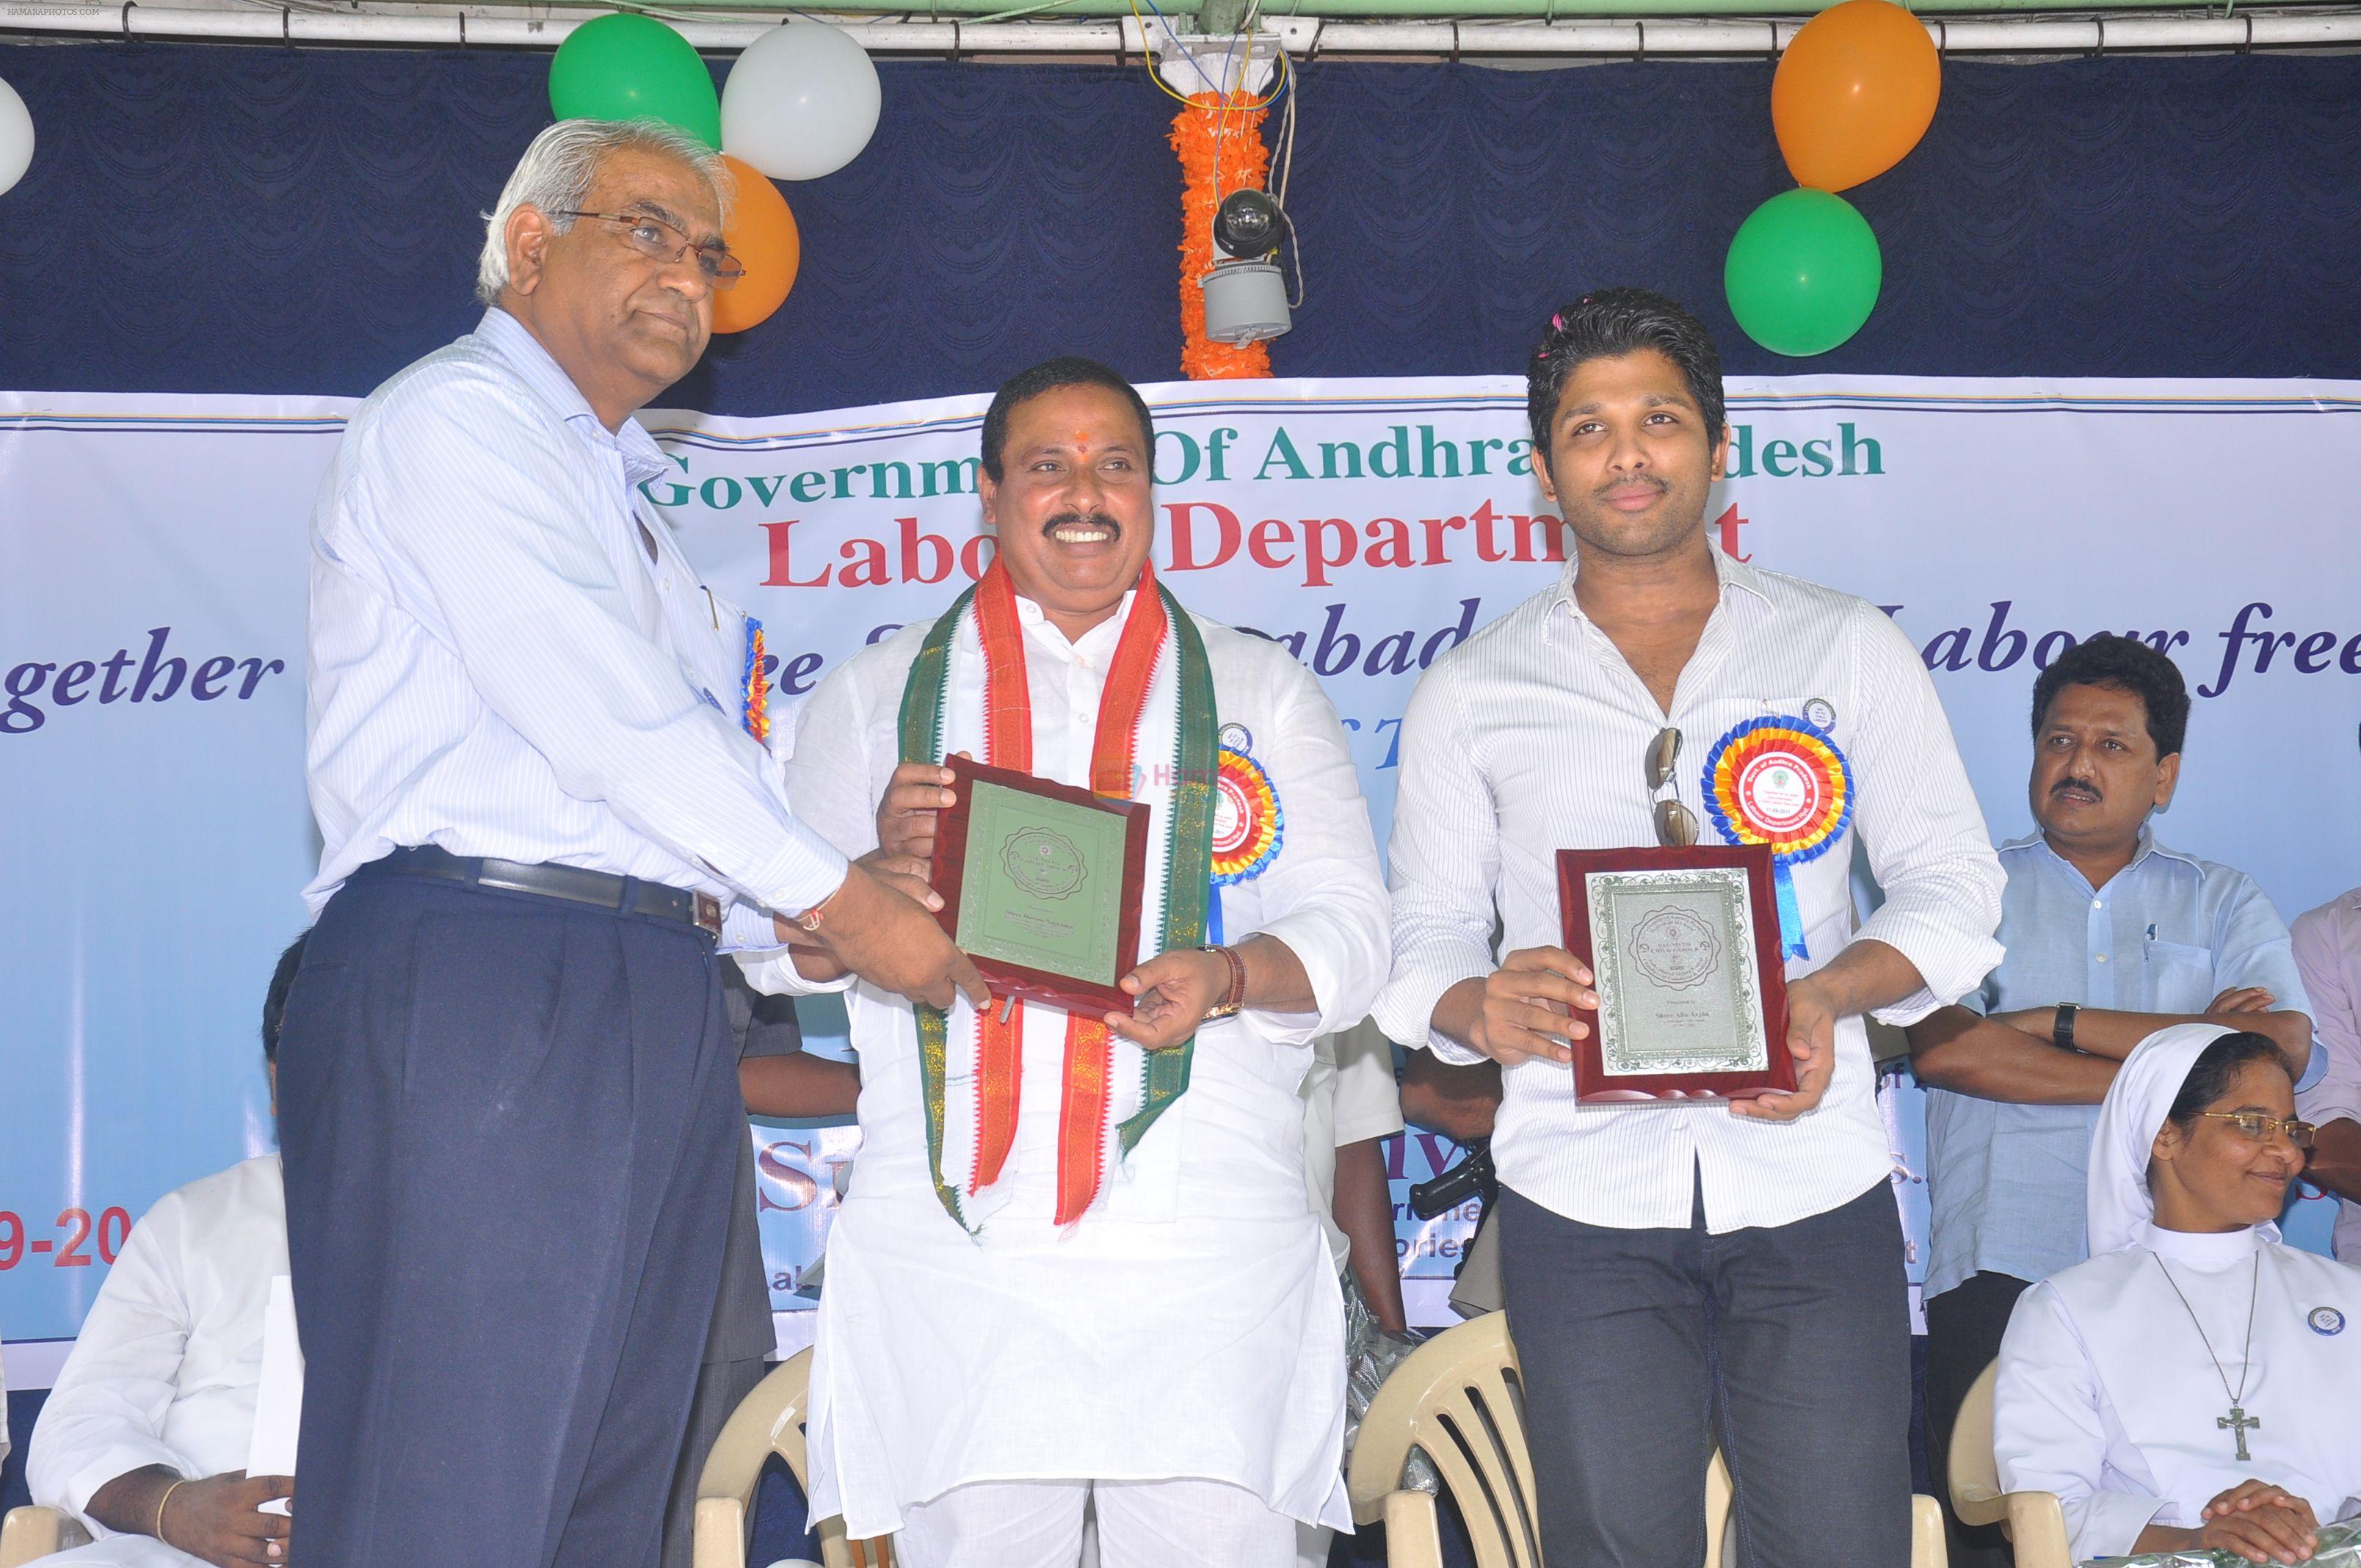 Allu Arjun attends No Child Labour Event on 16th September 2011 at St. Ann's High School in Secunderabad